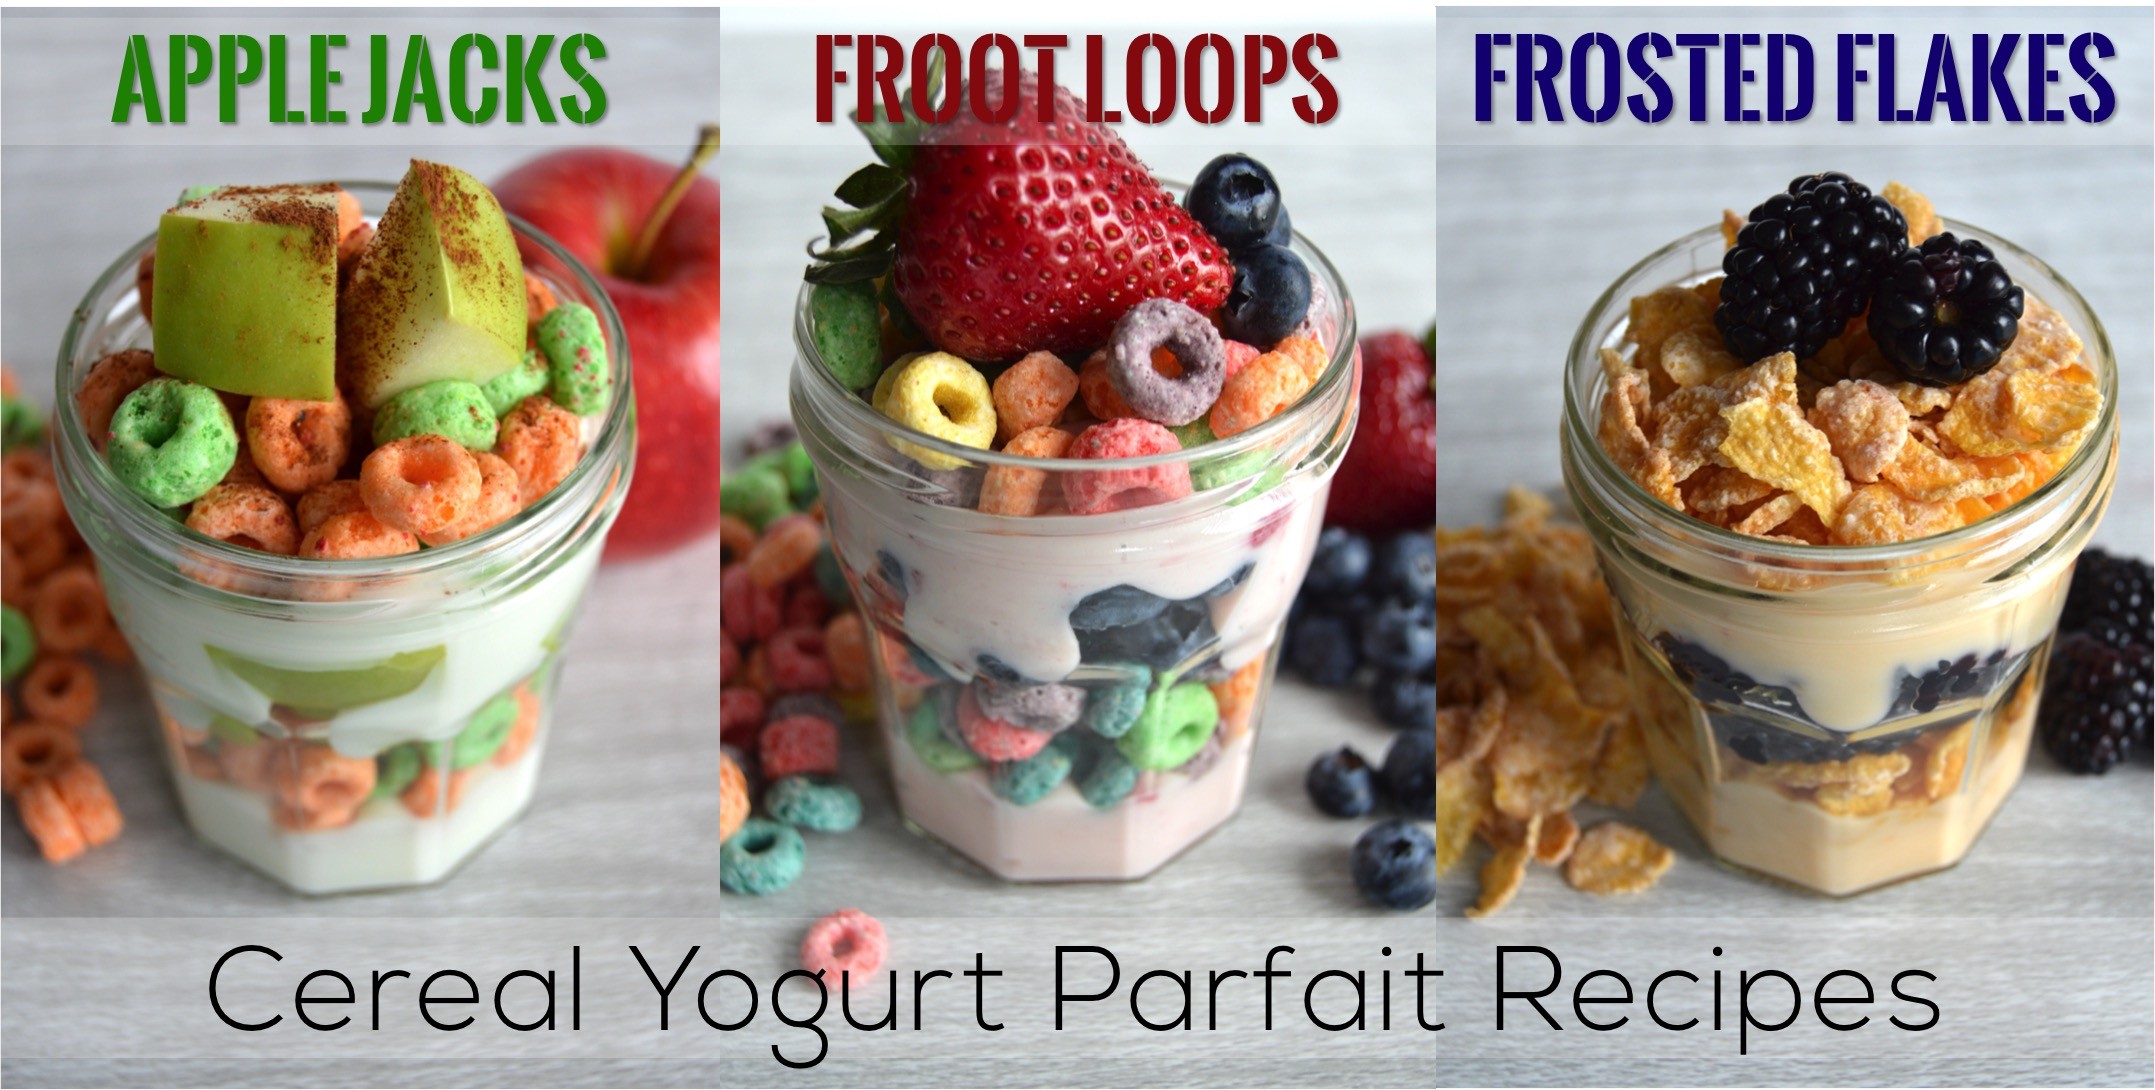 3 Cereal Yogurt Parfait Recipes using Kellogg cereals | Breakfast recipe for a cereal yogurt parfait with fruit. Ideas for Kellogg cereal parfait: Apple Jacks, Froot Loops, and Frosted Flakes. Fun breakfast idea!